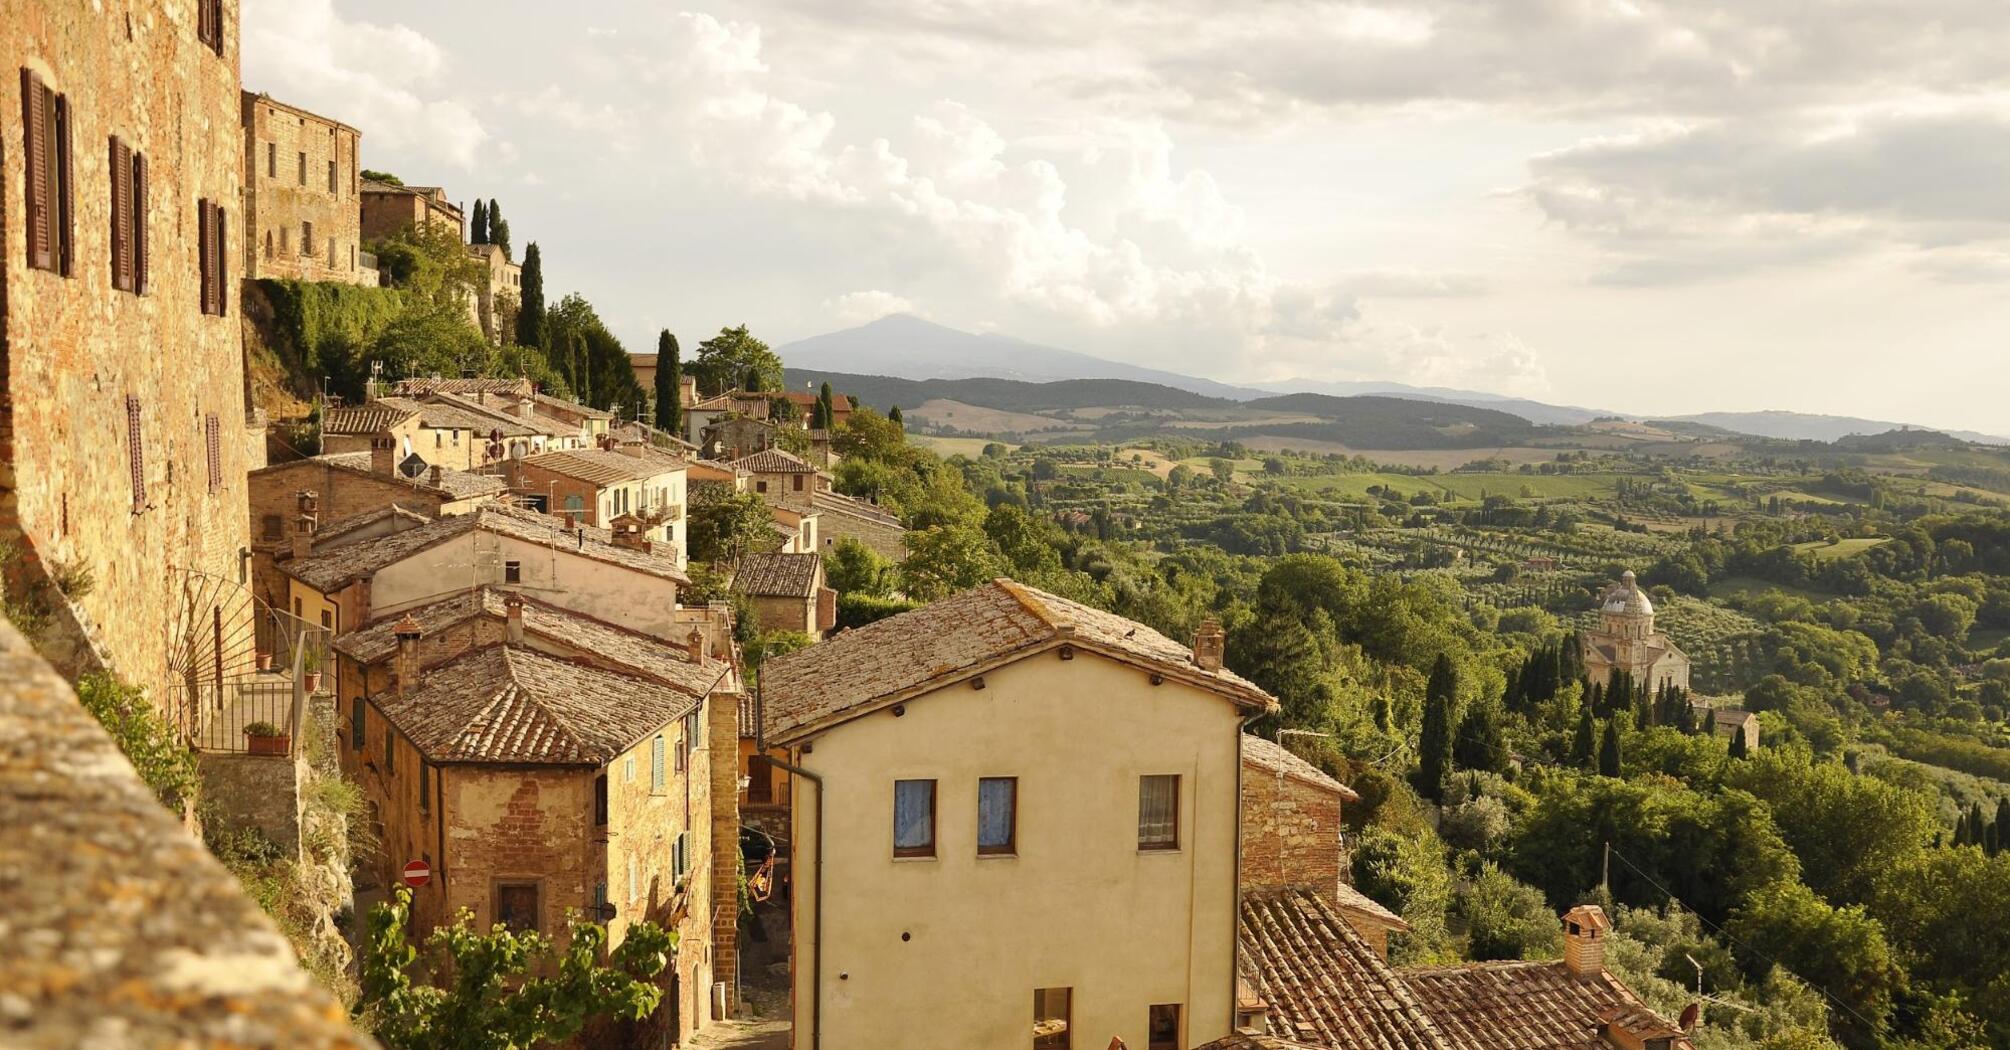 The evening sun illuminates the ancient Italian town with its terracotta roofs and picturesque landscapes